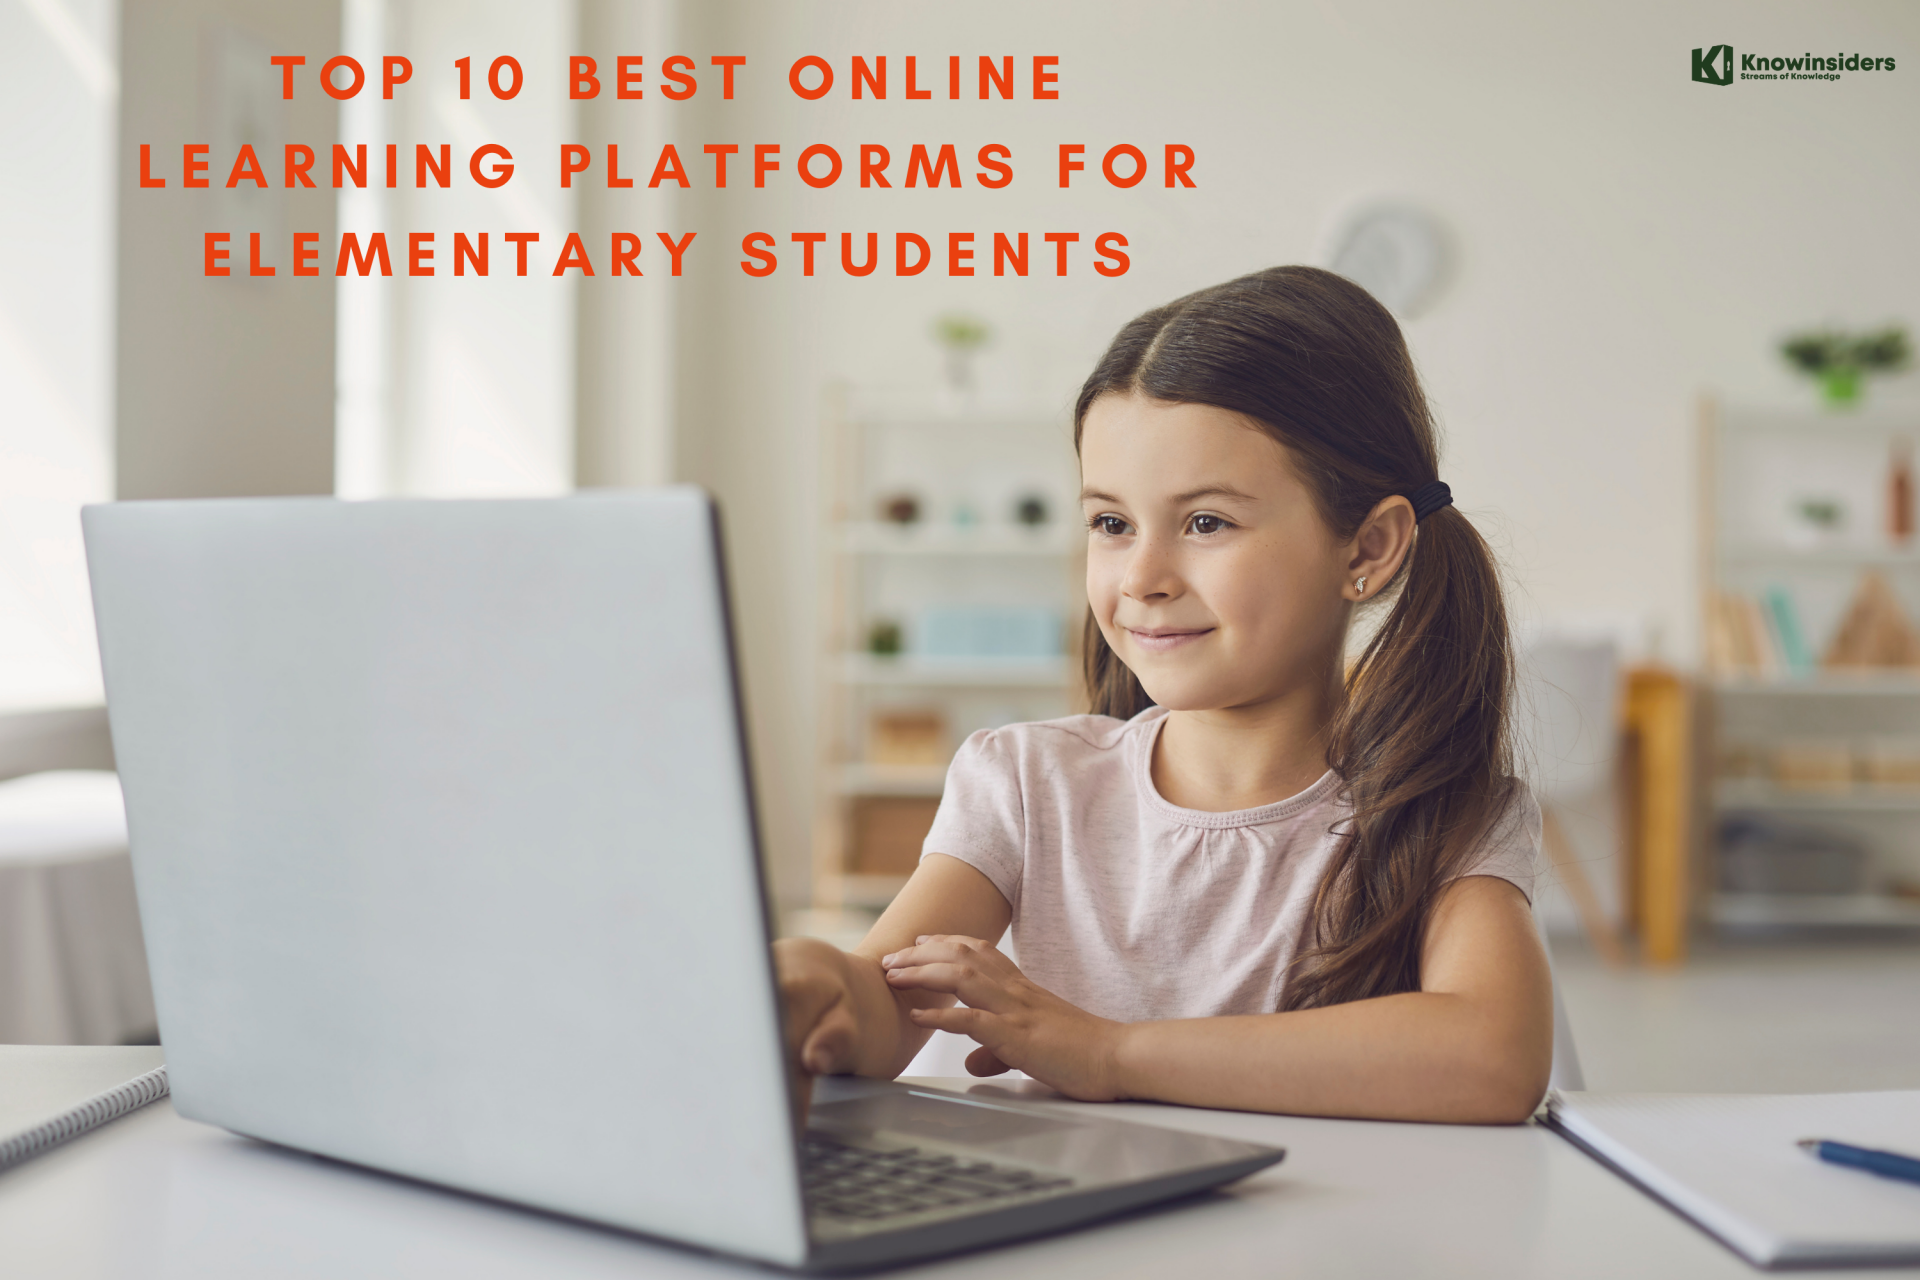 Top 10 Best Online Learning Platforms For Elementary Students